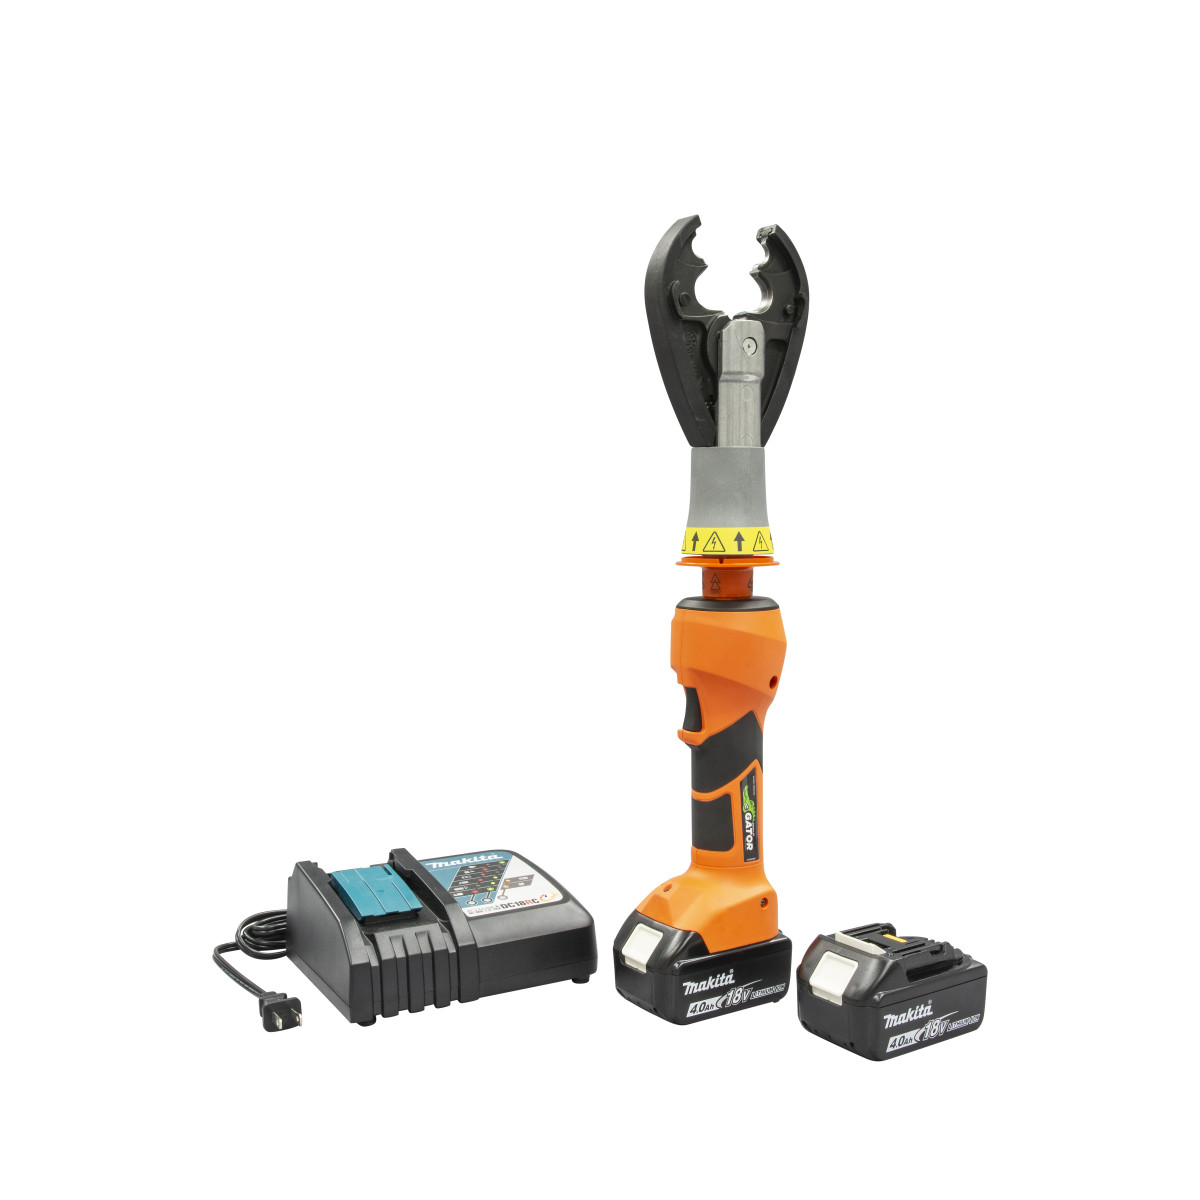 6 Ton Insulated Crimper with CJD30 Head and 120V Charger. 1000v Insulation. Brush guarded head - helps avoid accidental contact with conductors. Tri-insulation barrier - Provides three (3) layers of protection (Patent Pending). 360° Rotating head  - For improved agility in confined work spaces. Double -tap safety feature option -Prevents unintentional operation. Bluetooth® communication